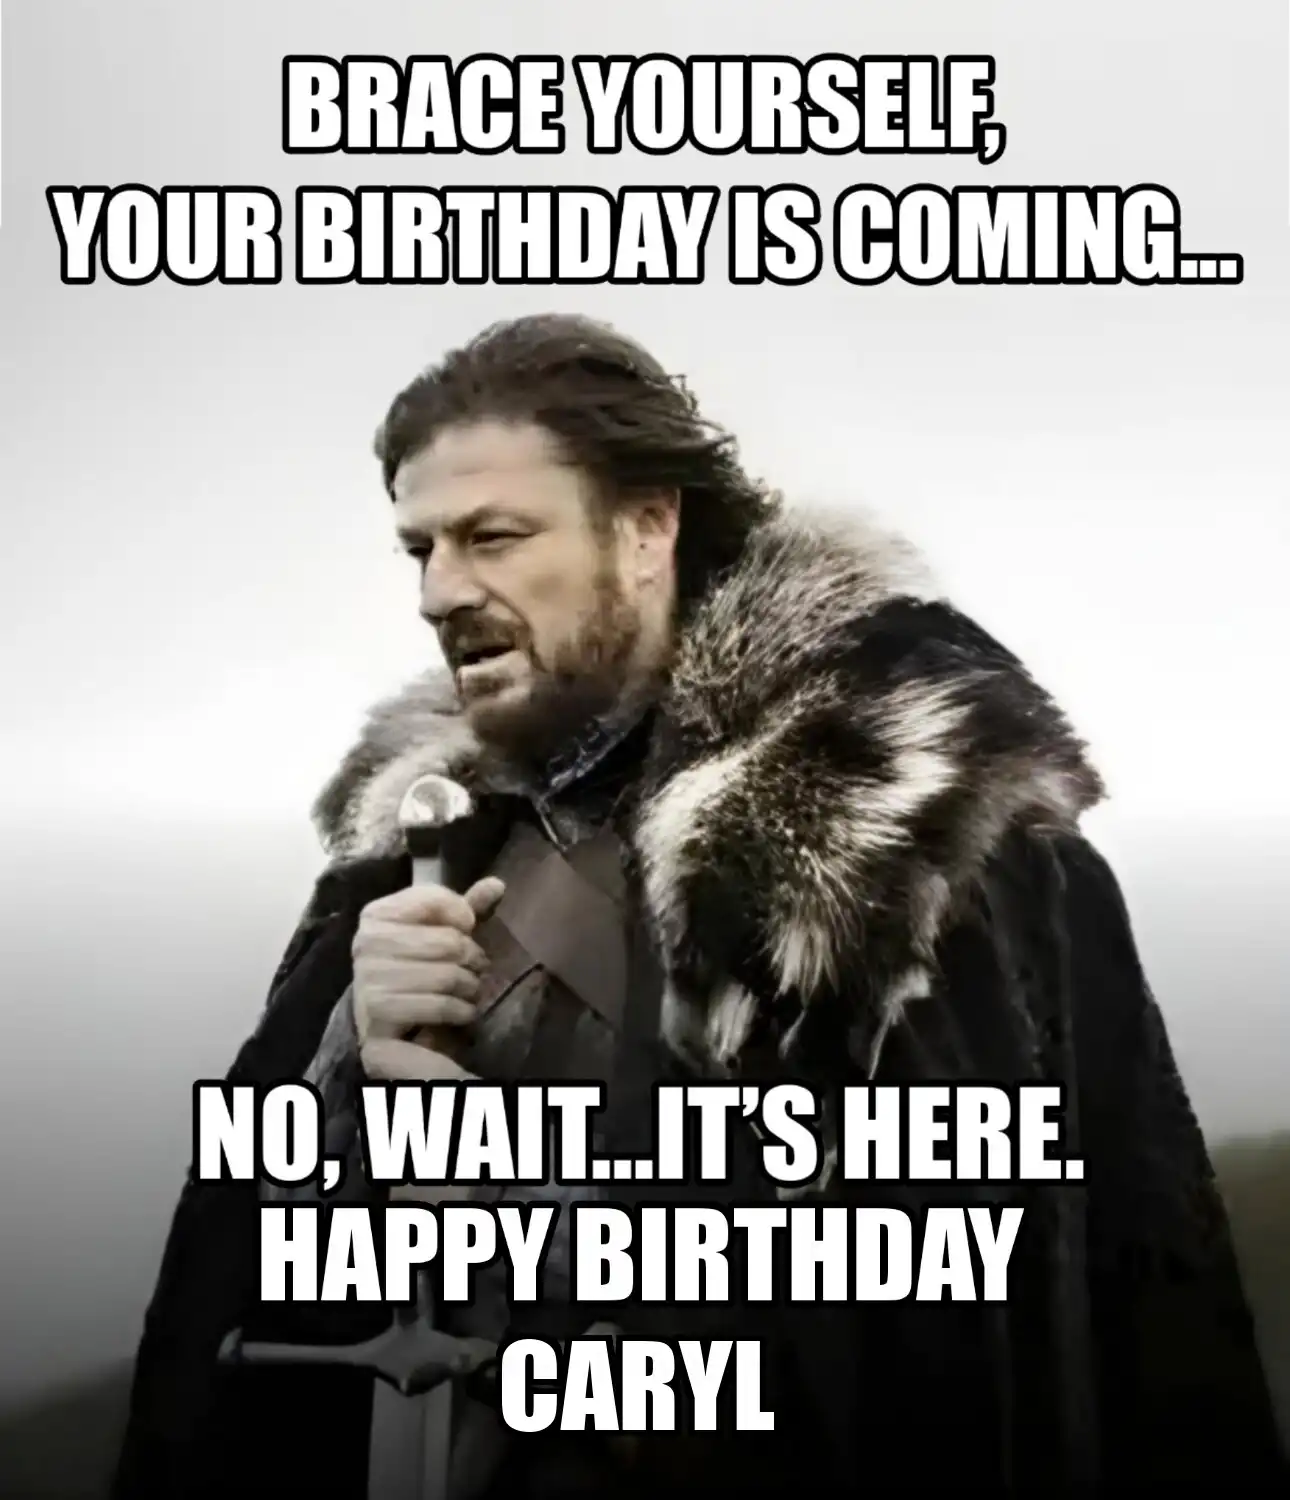 Happy Birthday Caryl Brace Yourself Your Birthday Is Coming Meme